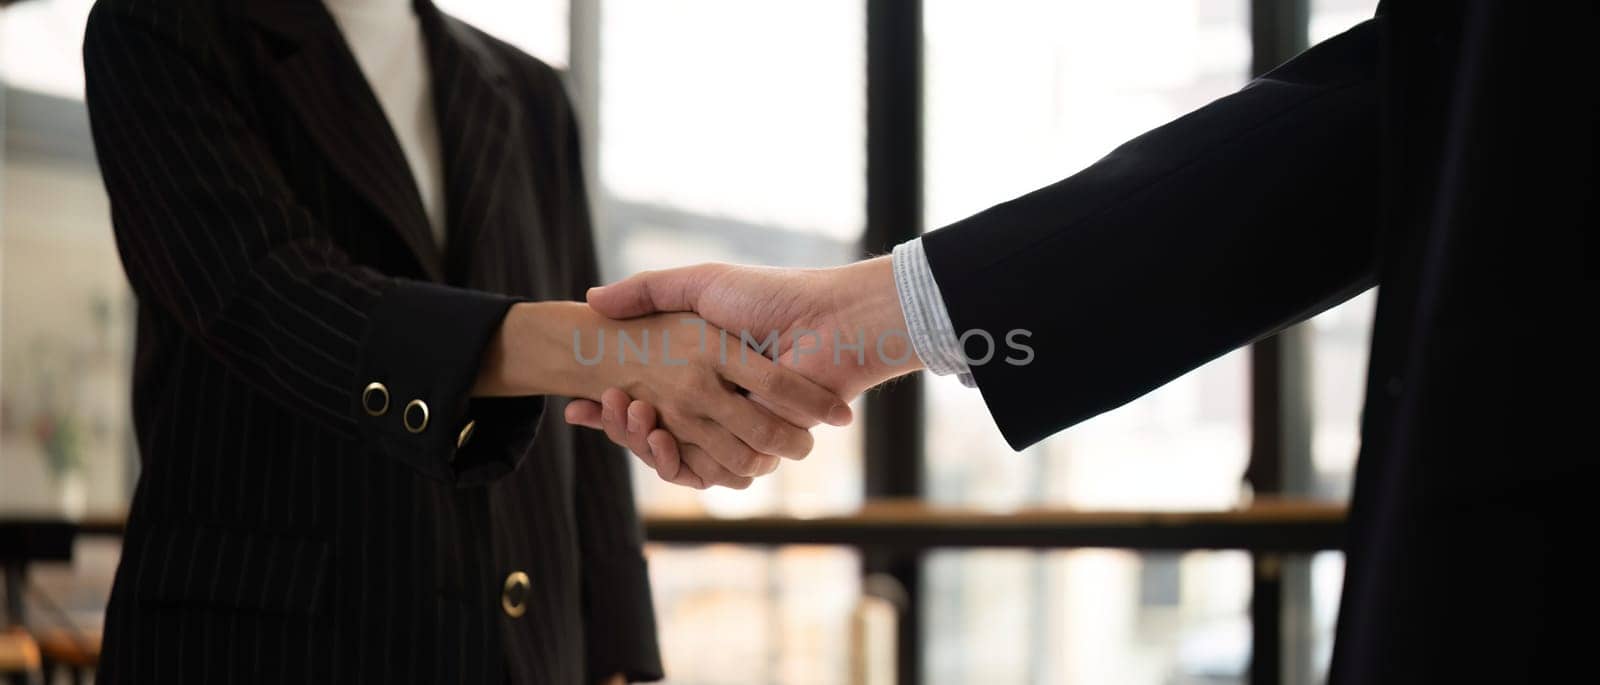 Businessmen shake hands after a meeting, congratulating colleagues and reaching a business agreement..